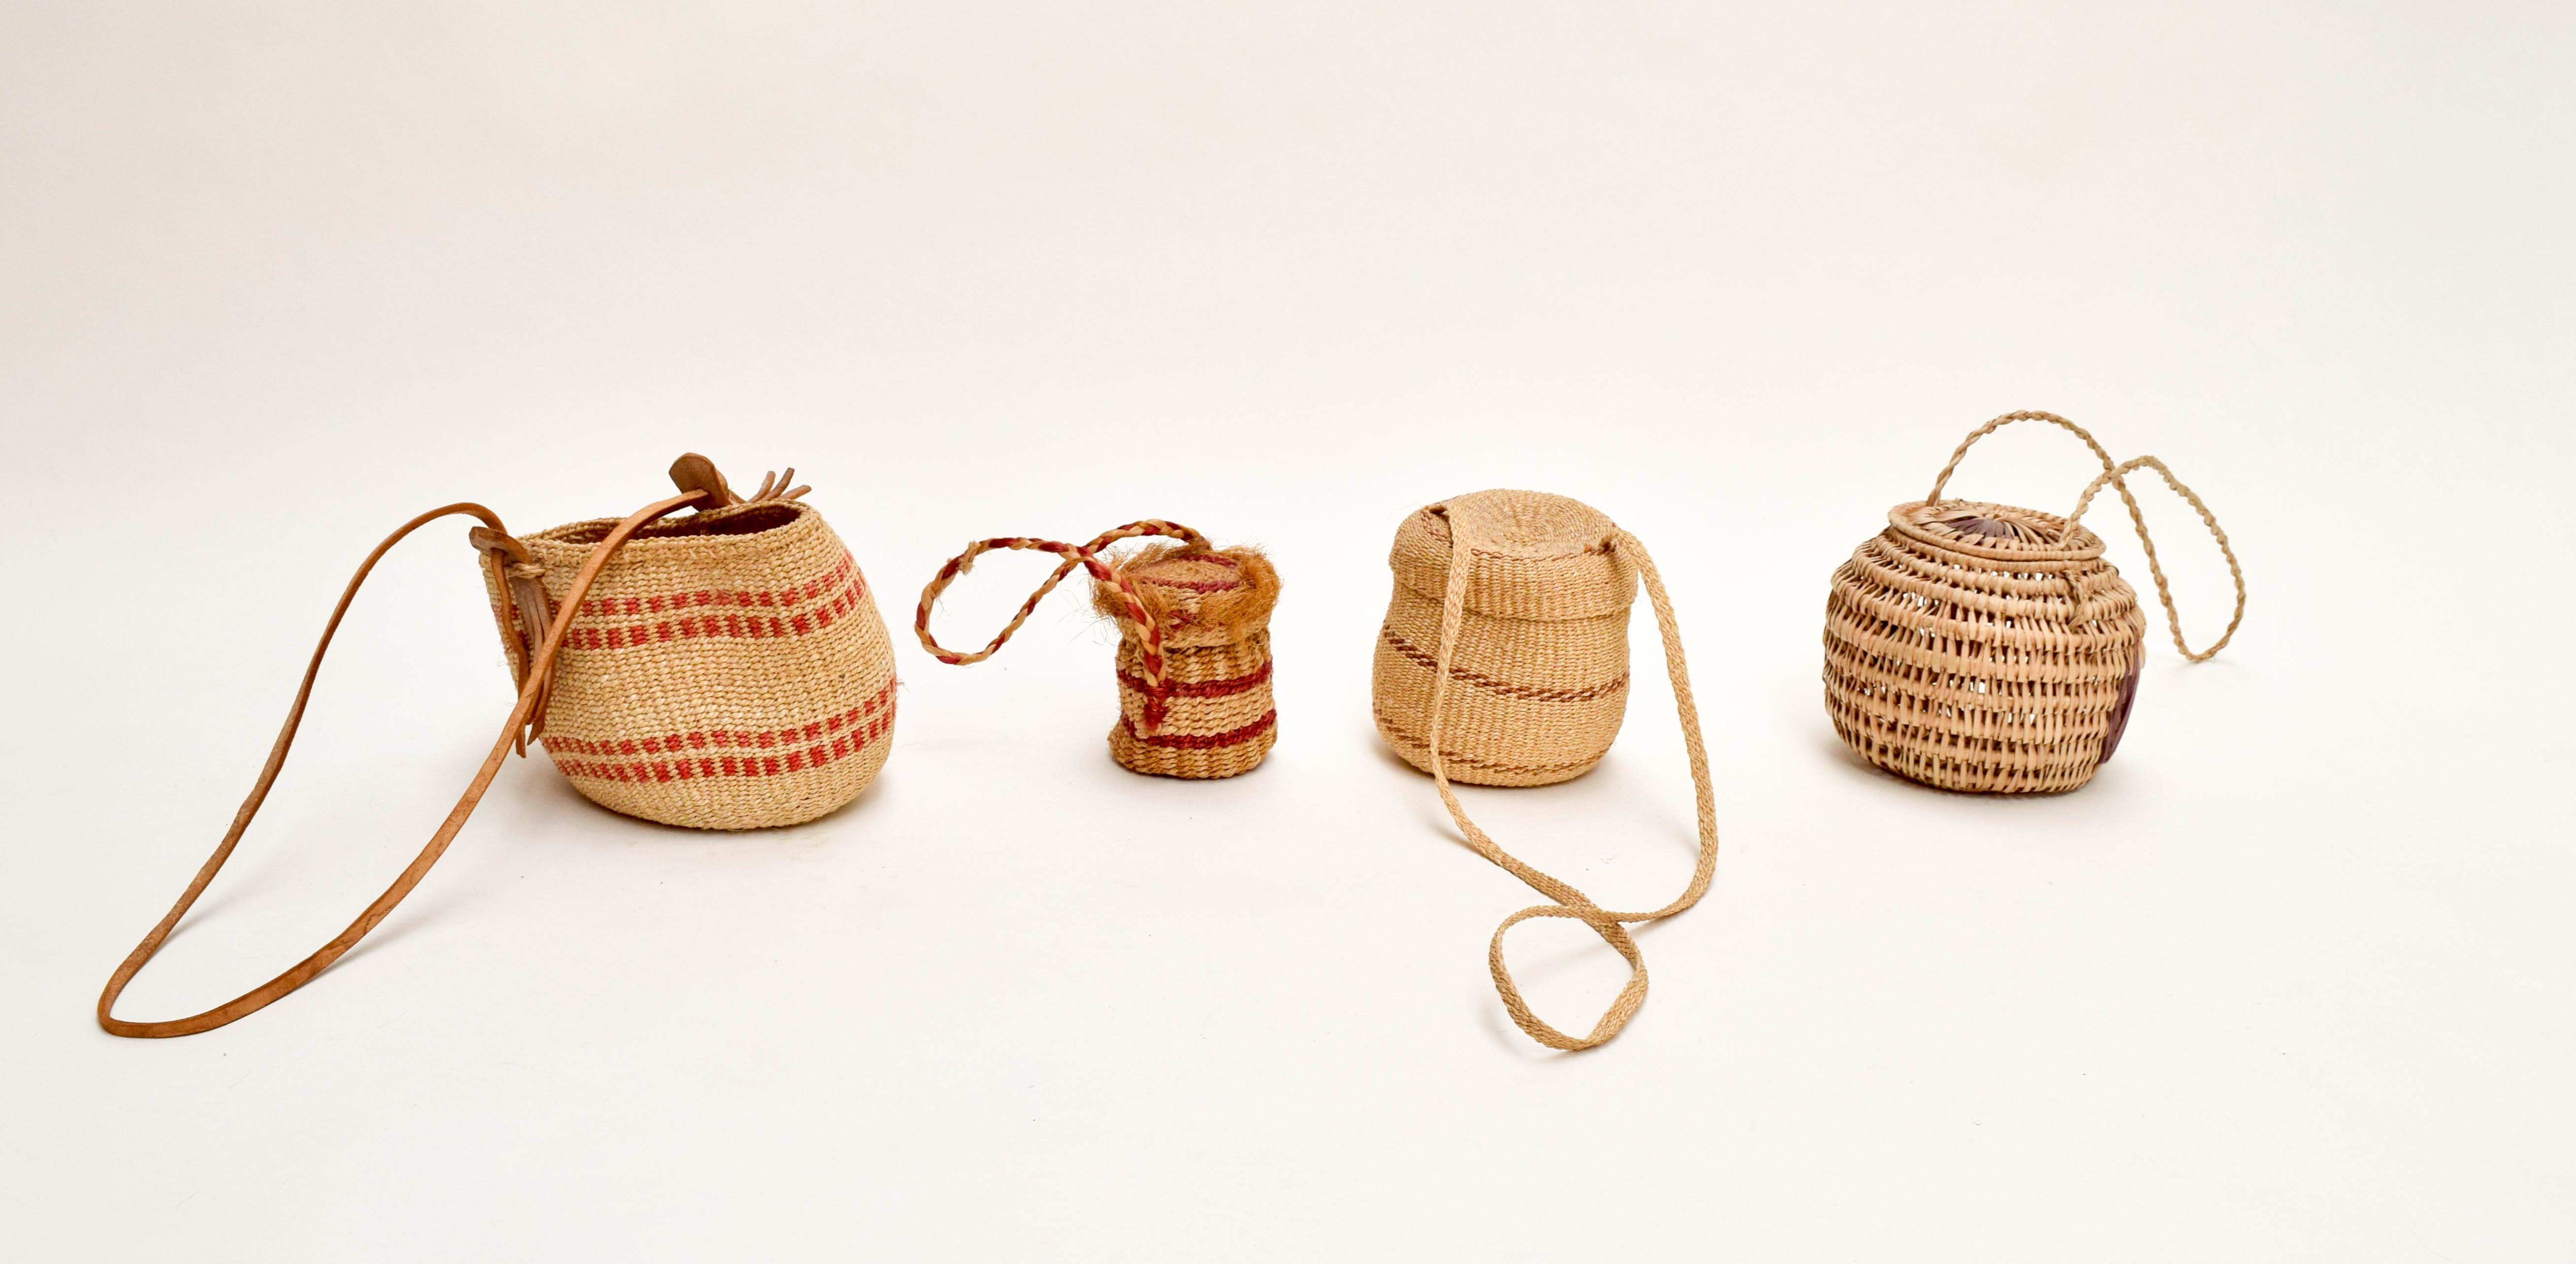 Cecilie Telle, "It Bags", basket collection